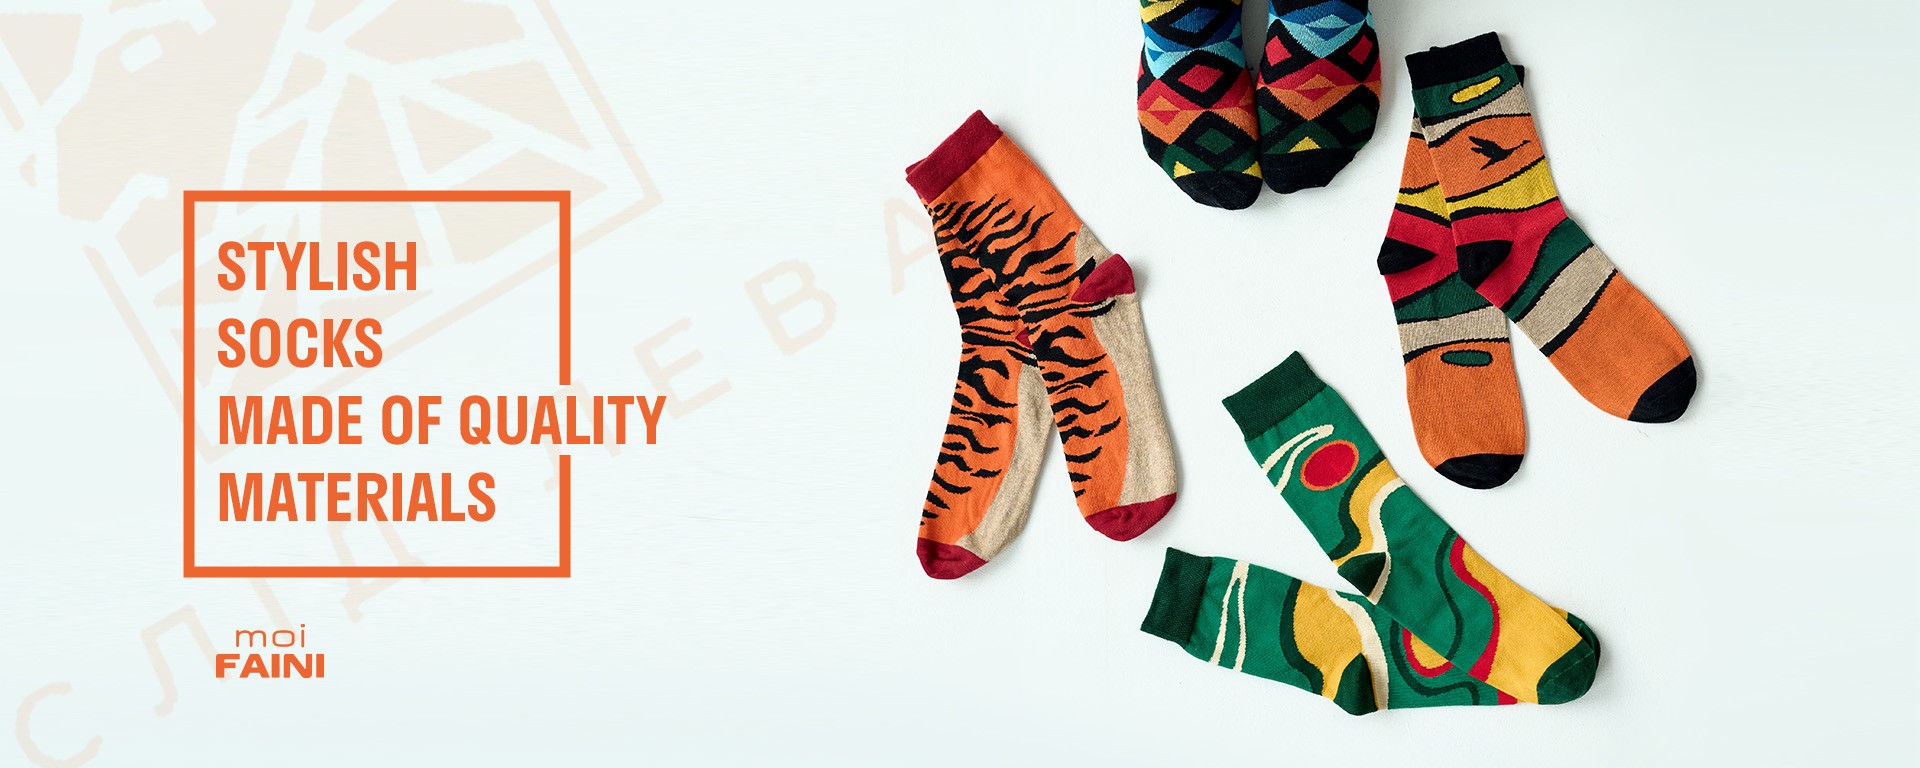 Stylish socks made of quality materials